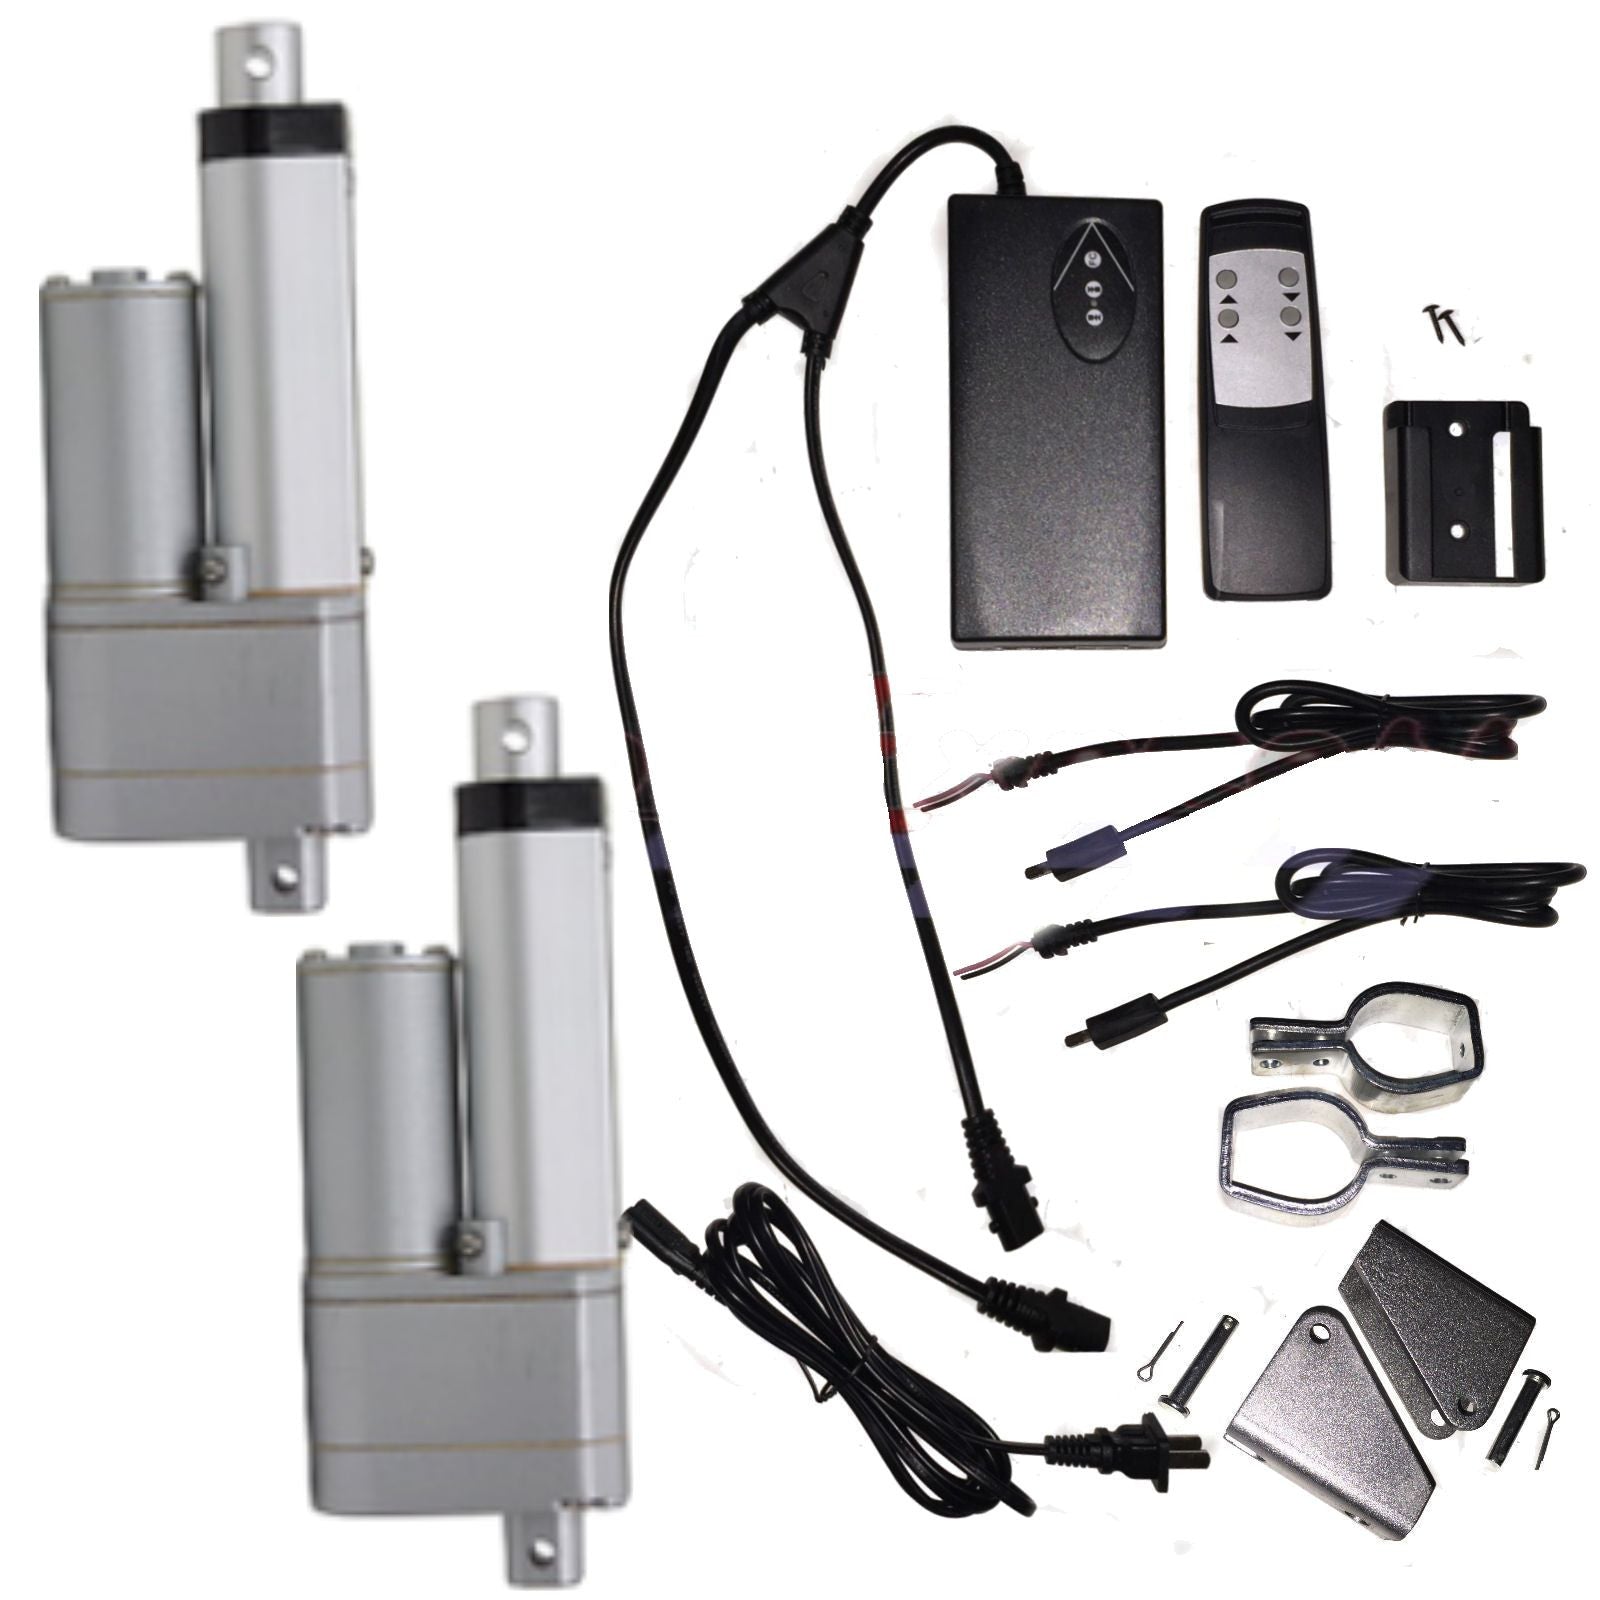 2 Linear Actuators 4" inch Stroke 12V 110V Power Supply With Remote and Brackets - AE-Power